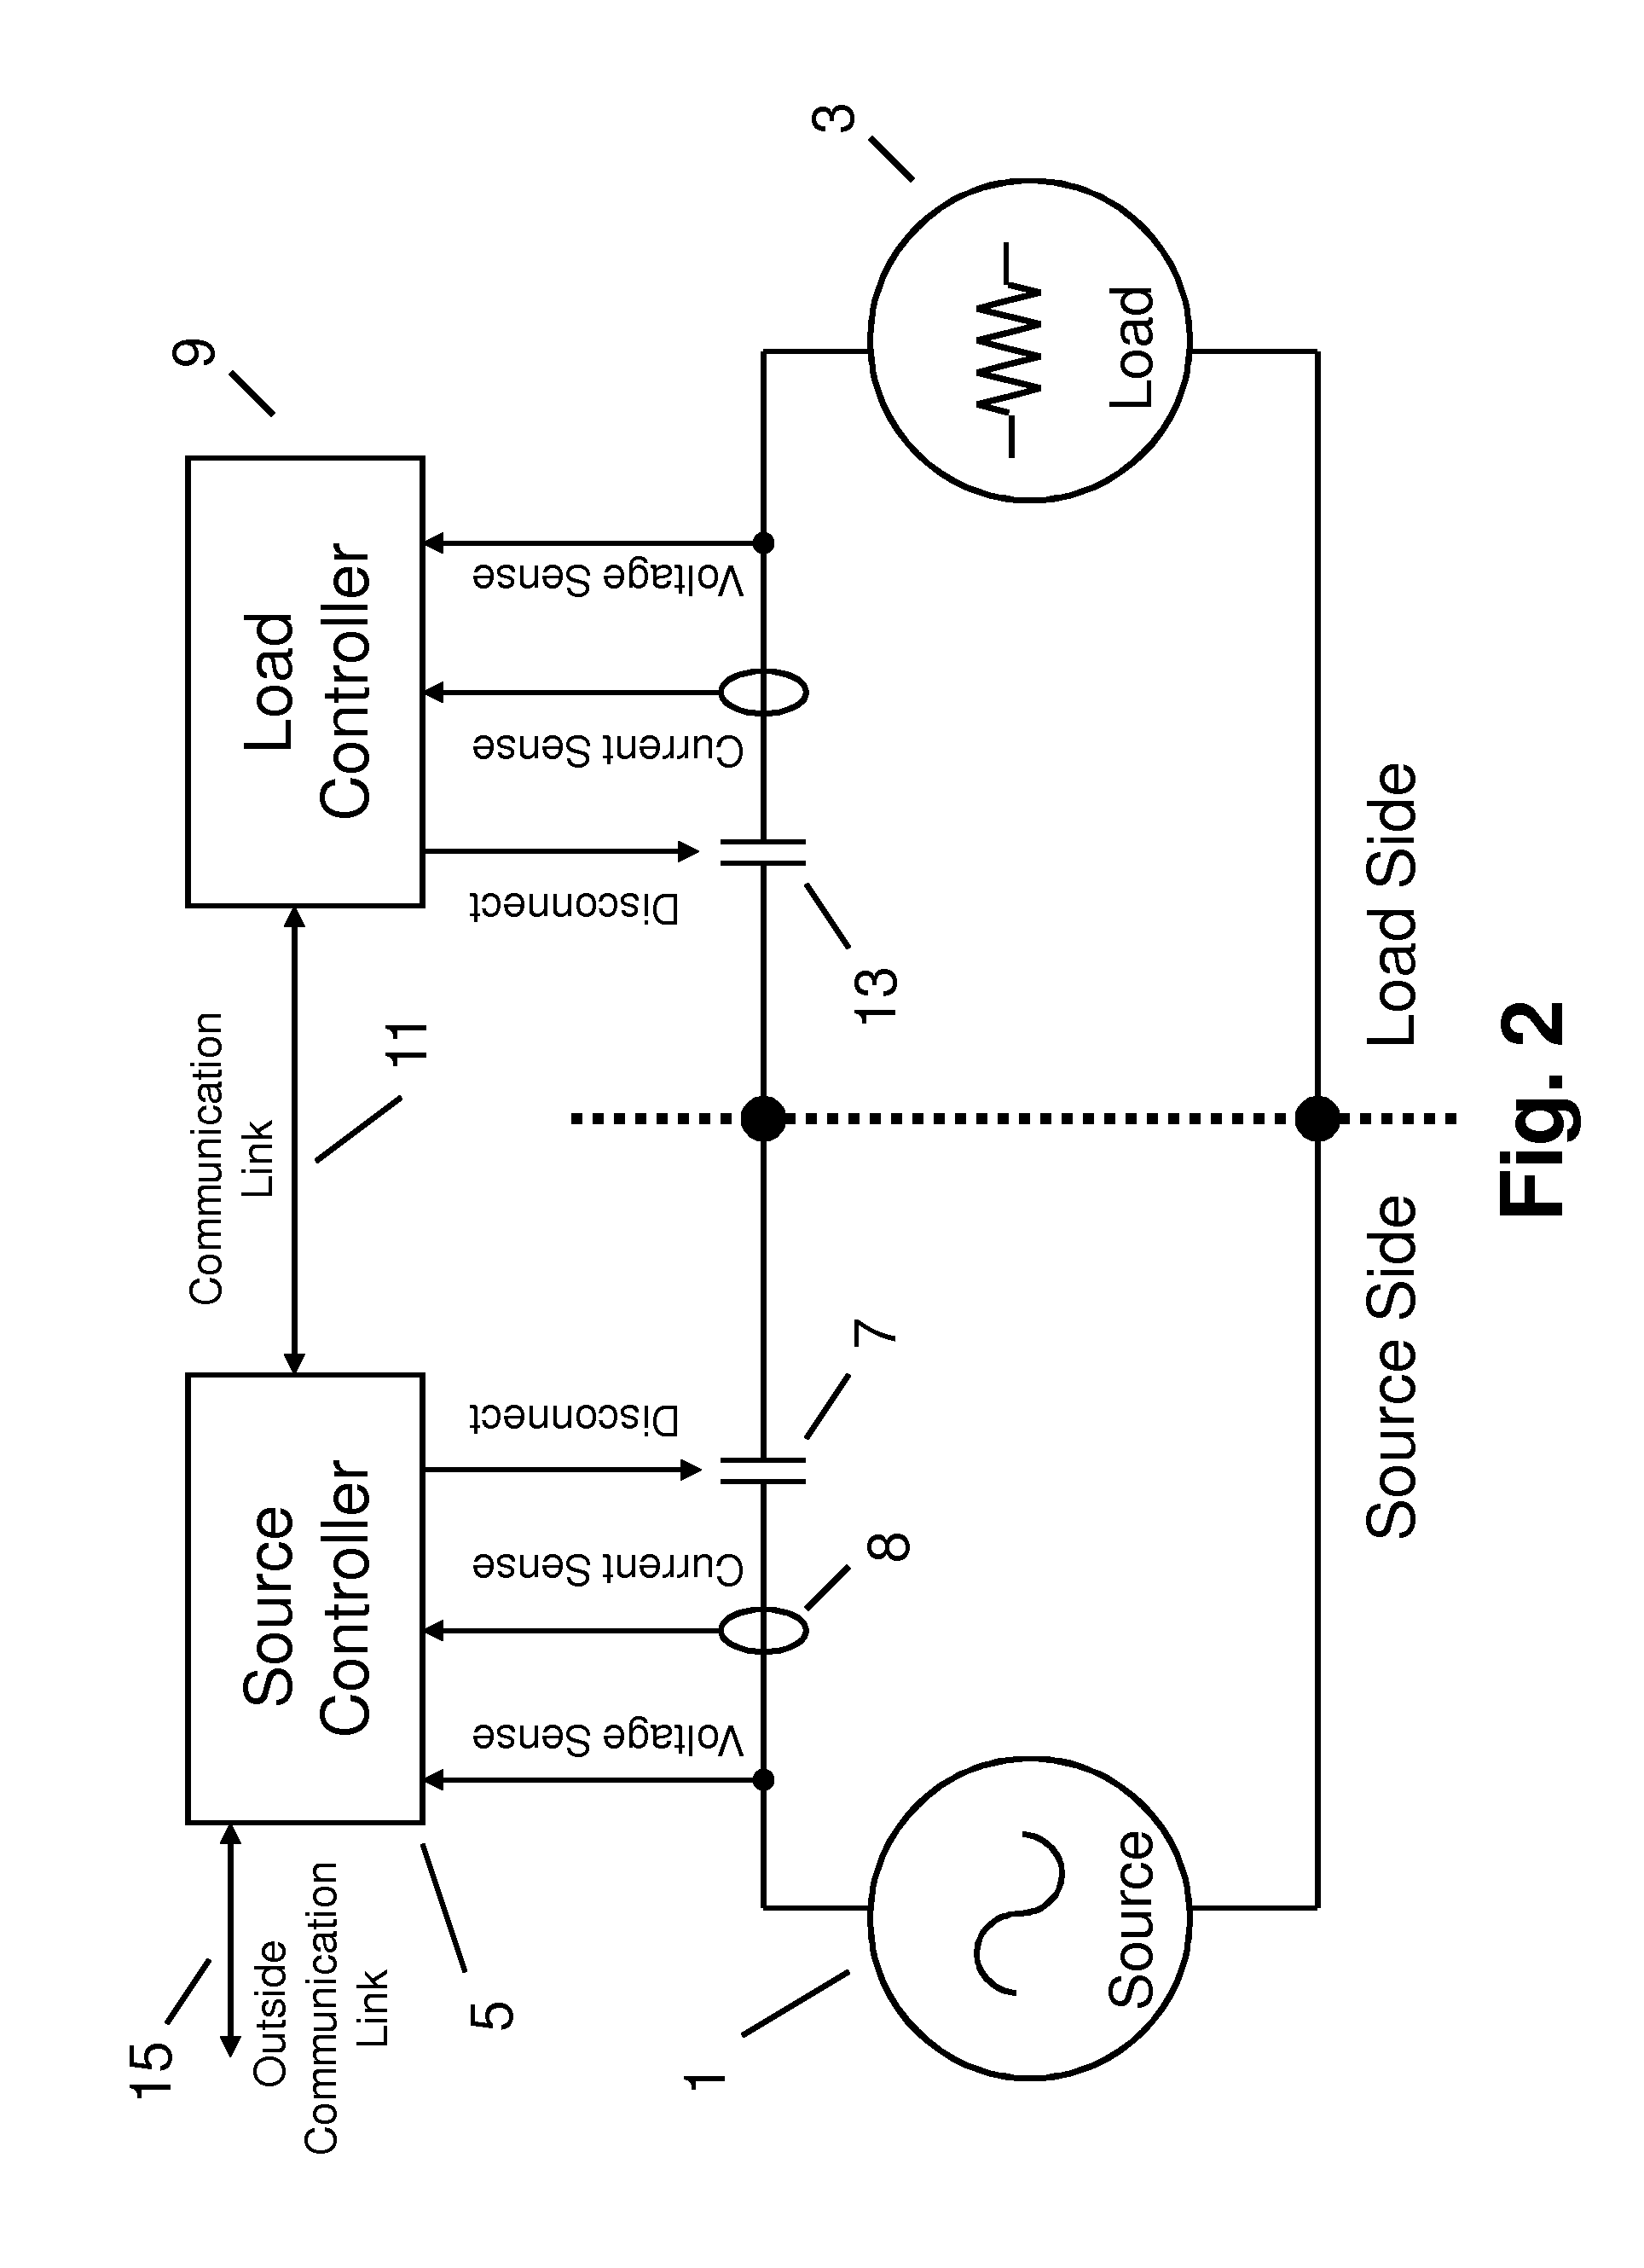 Power distribution system with fault protection using energy packet confirmation